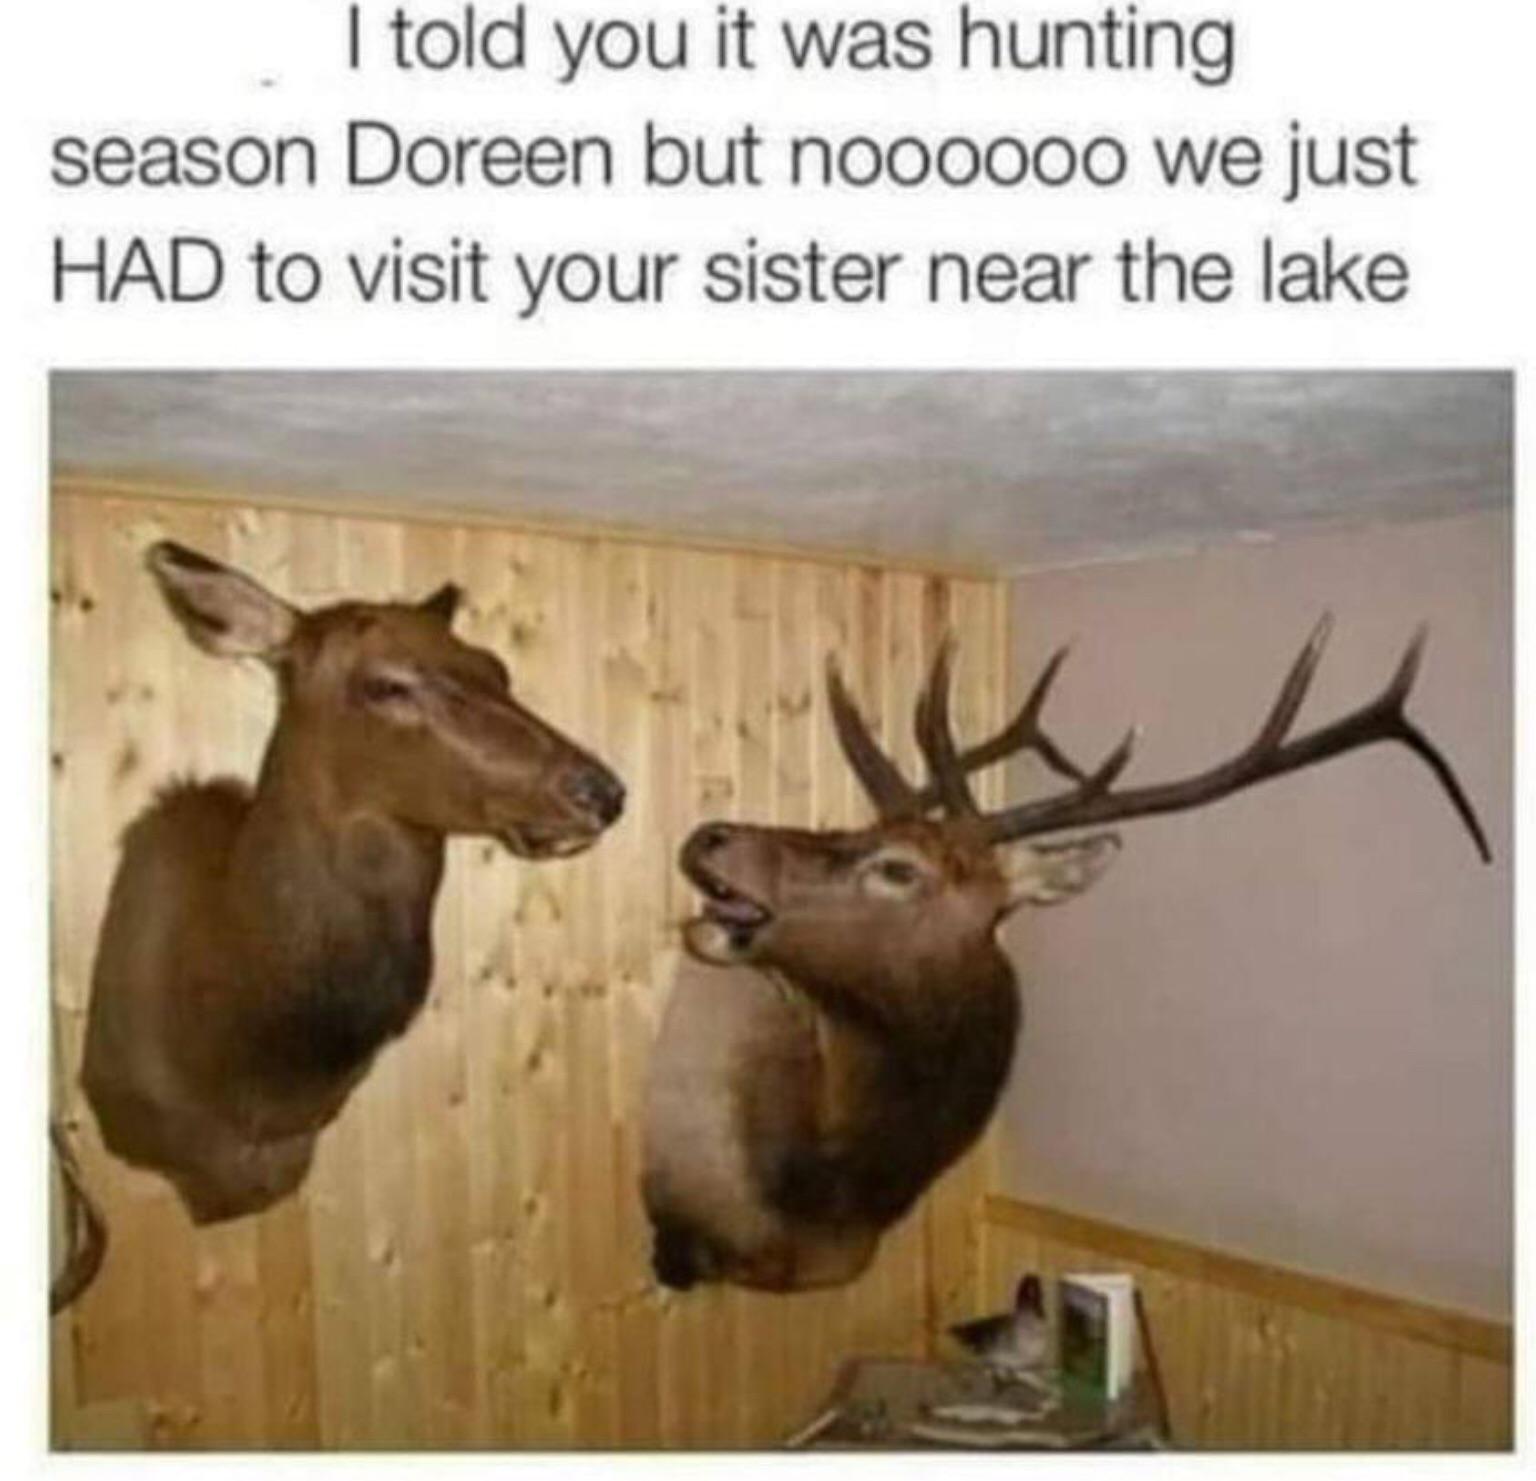 funny memes - told you it was hunting season doreen - I told you it was hunting season Doreen but noooooo we just Had to visit your sister near the lake